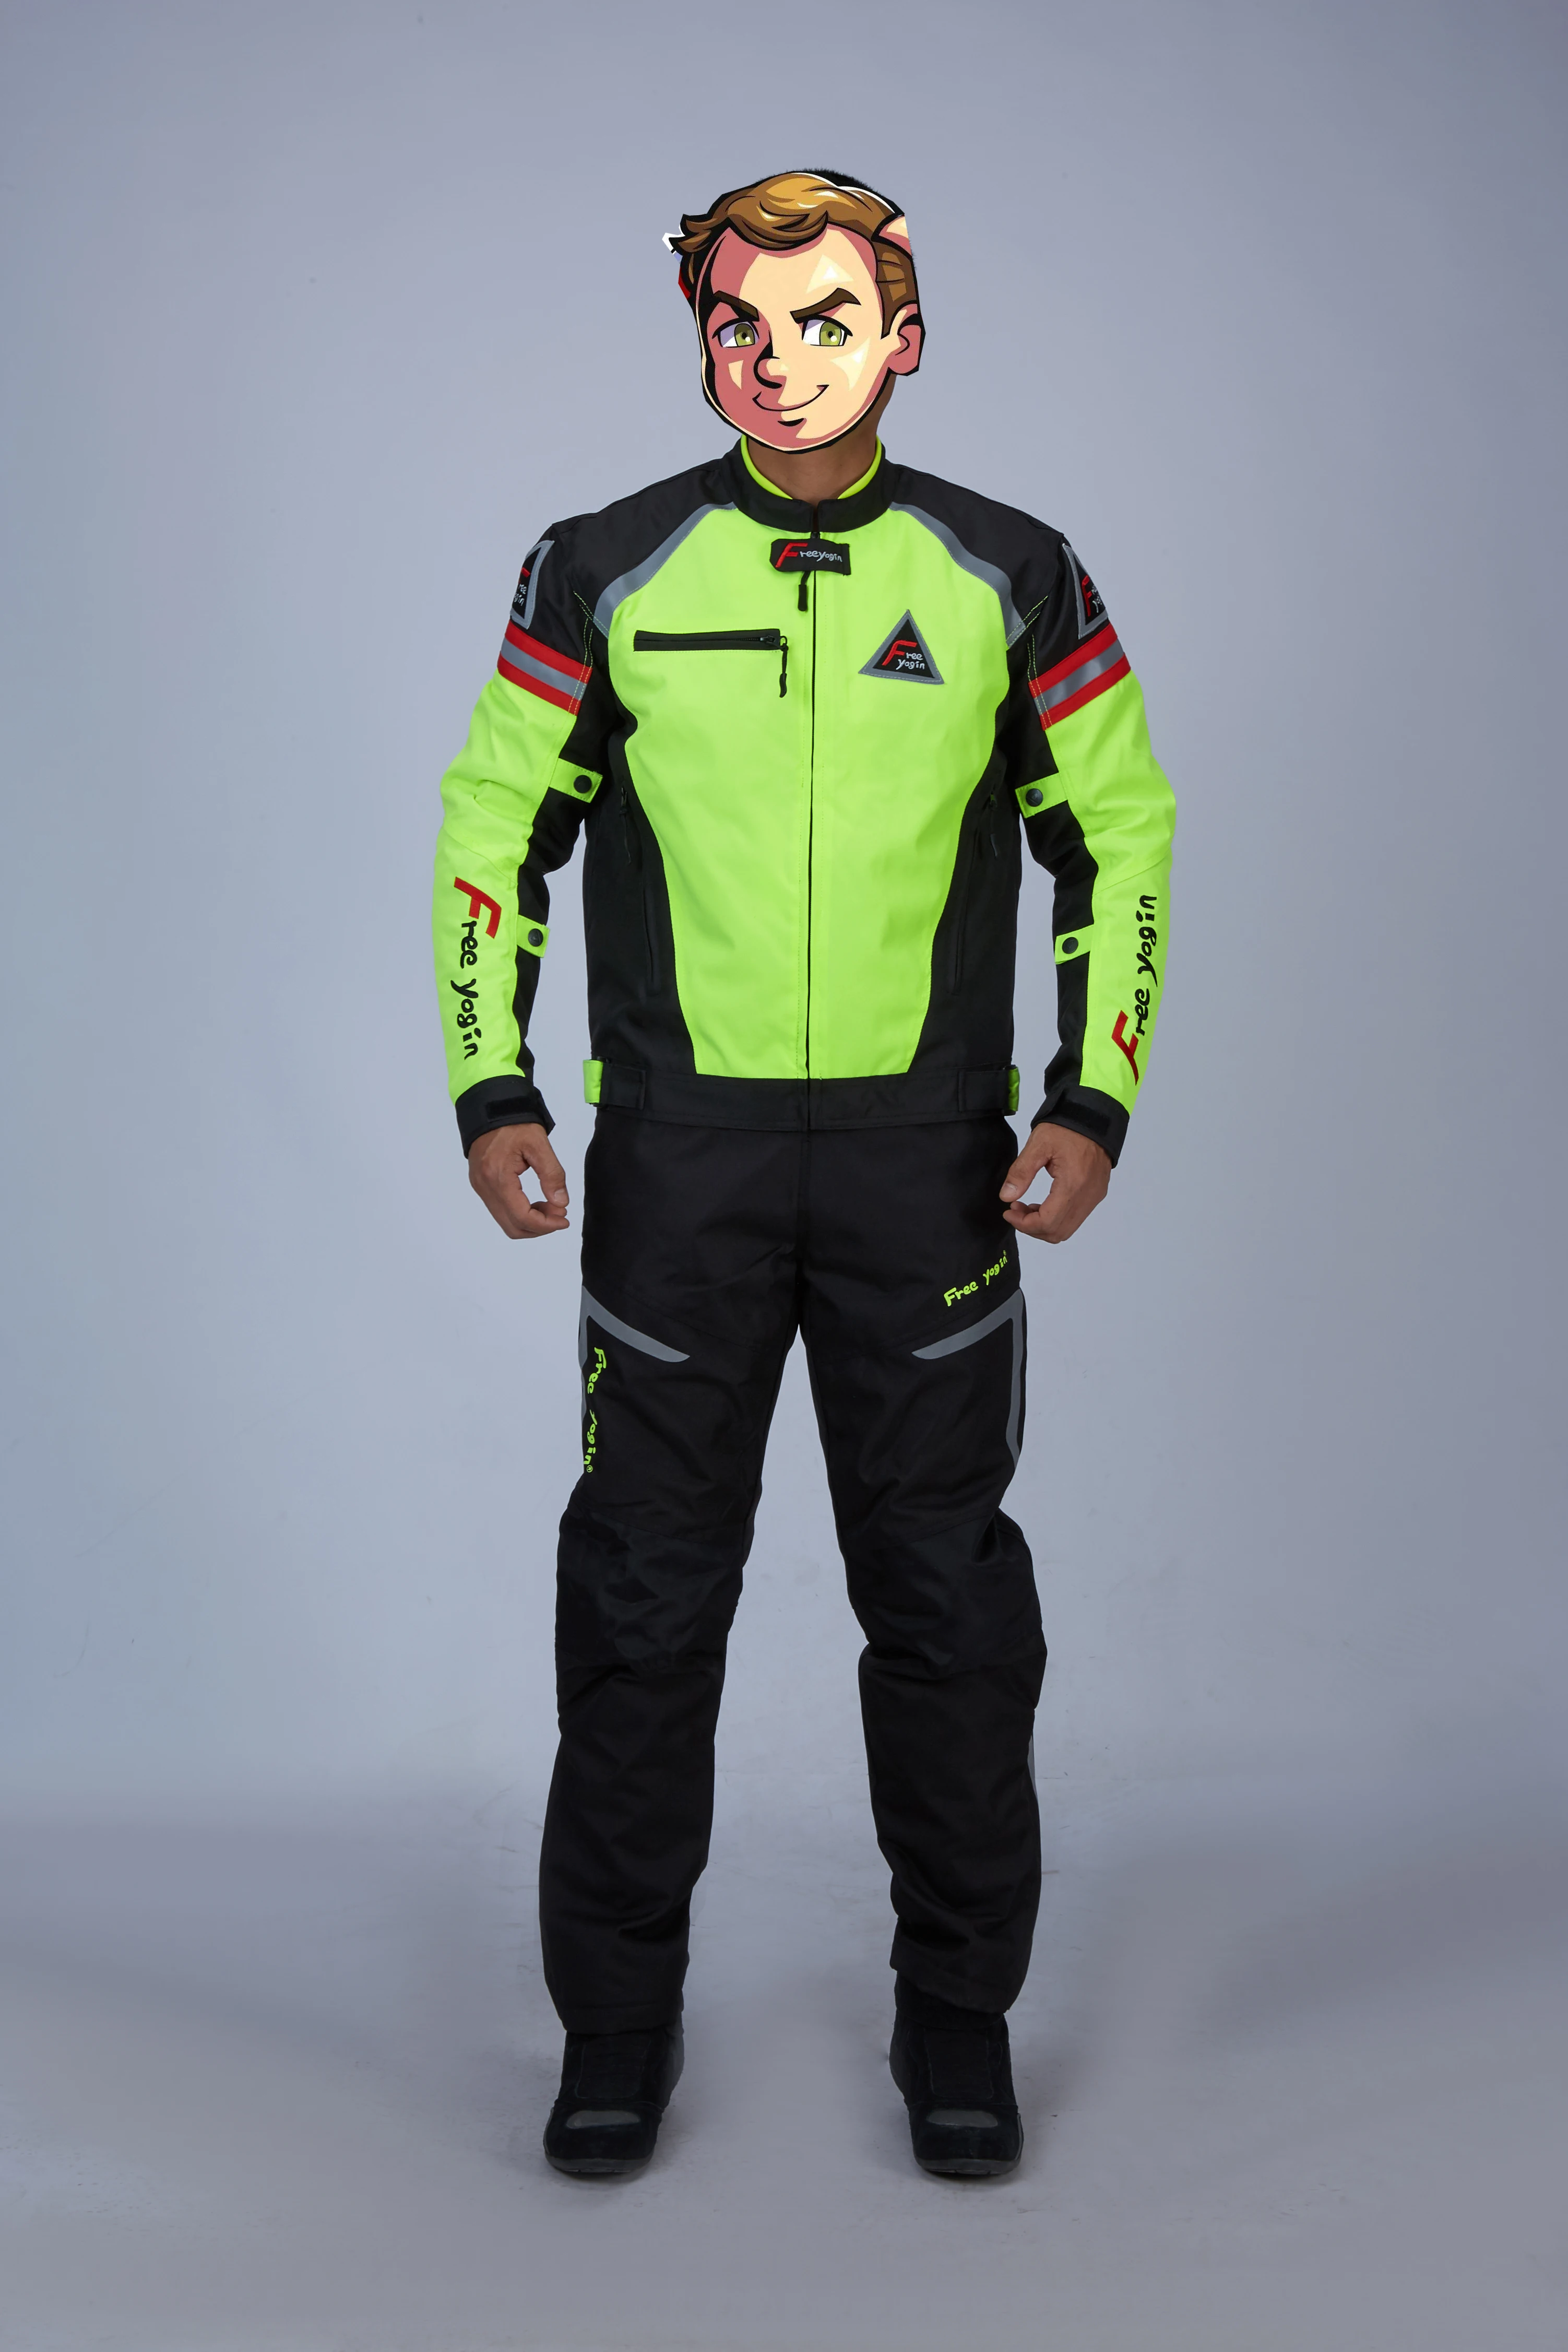 

Four-season motorcycle riding suit wind, warm, fall-proof motorcycle rider pulling suit with protective gear jacket and pants